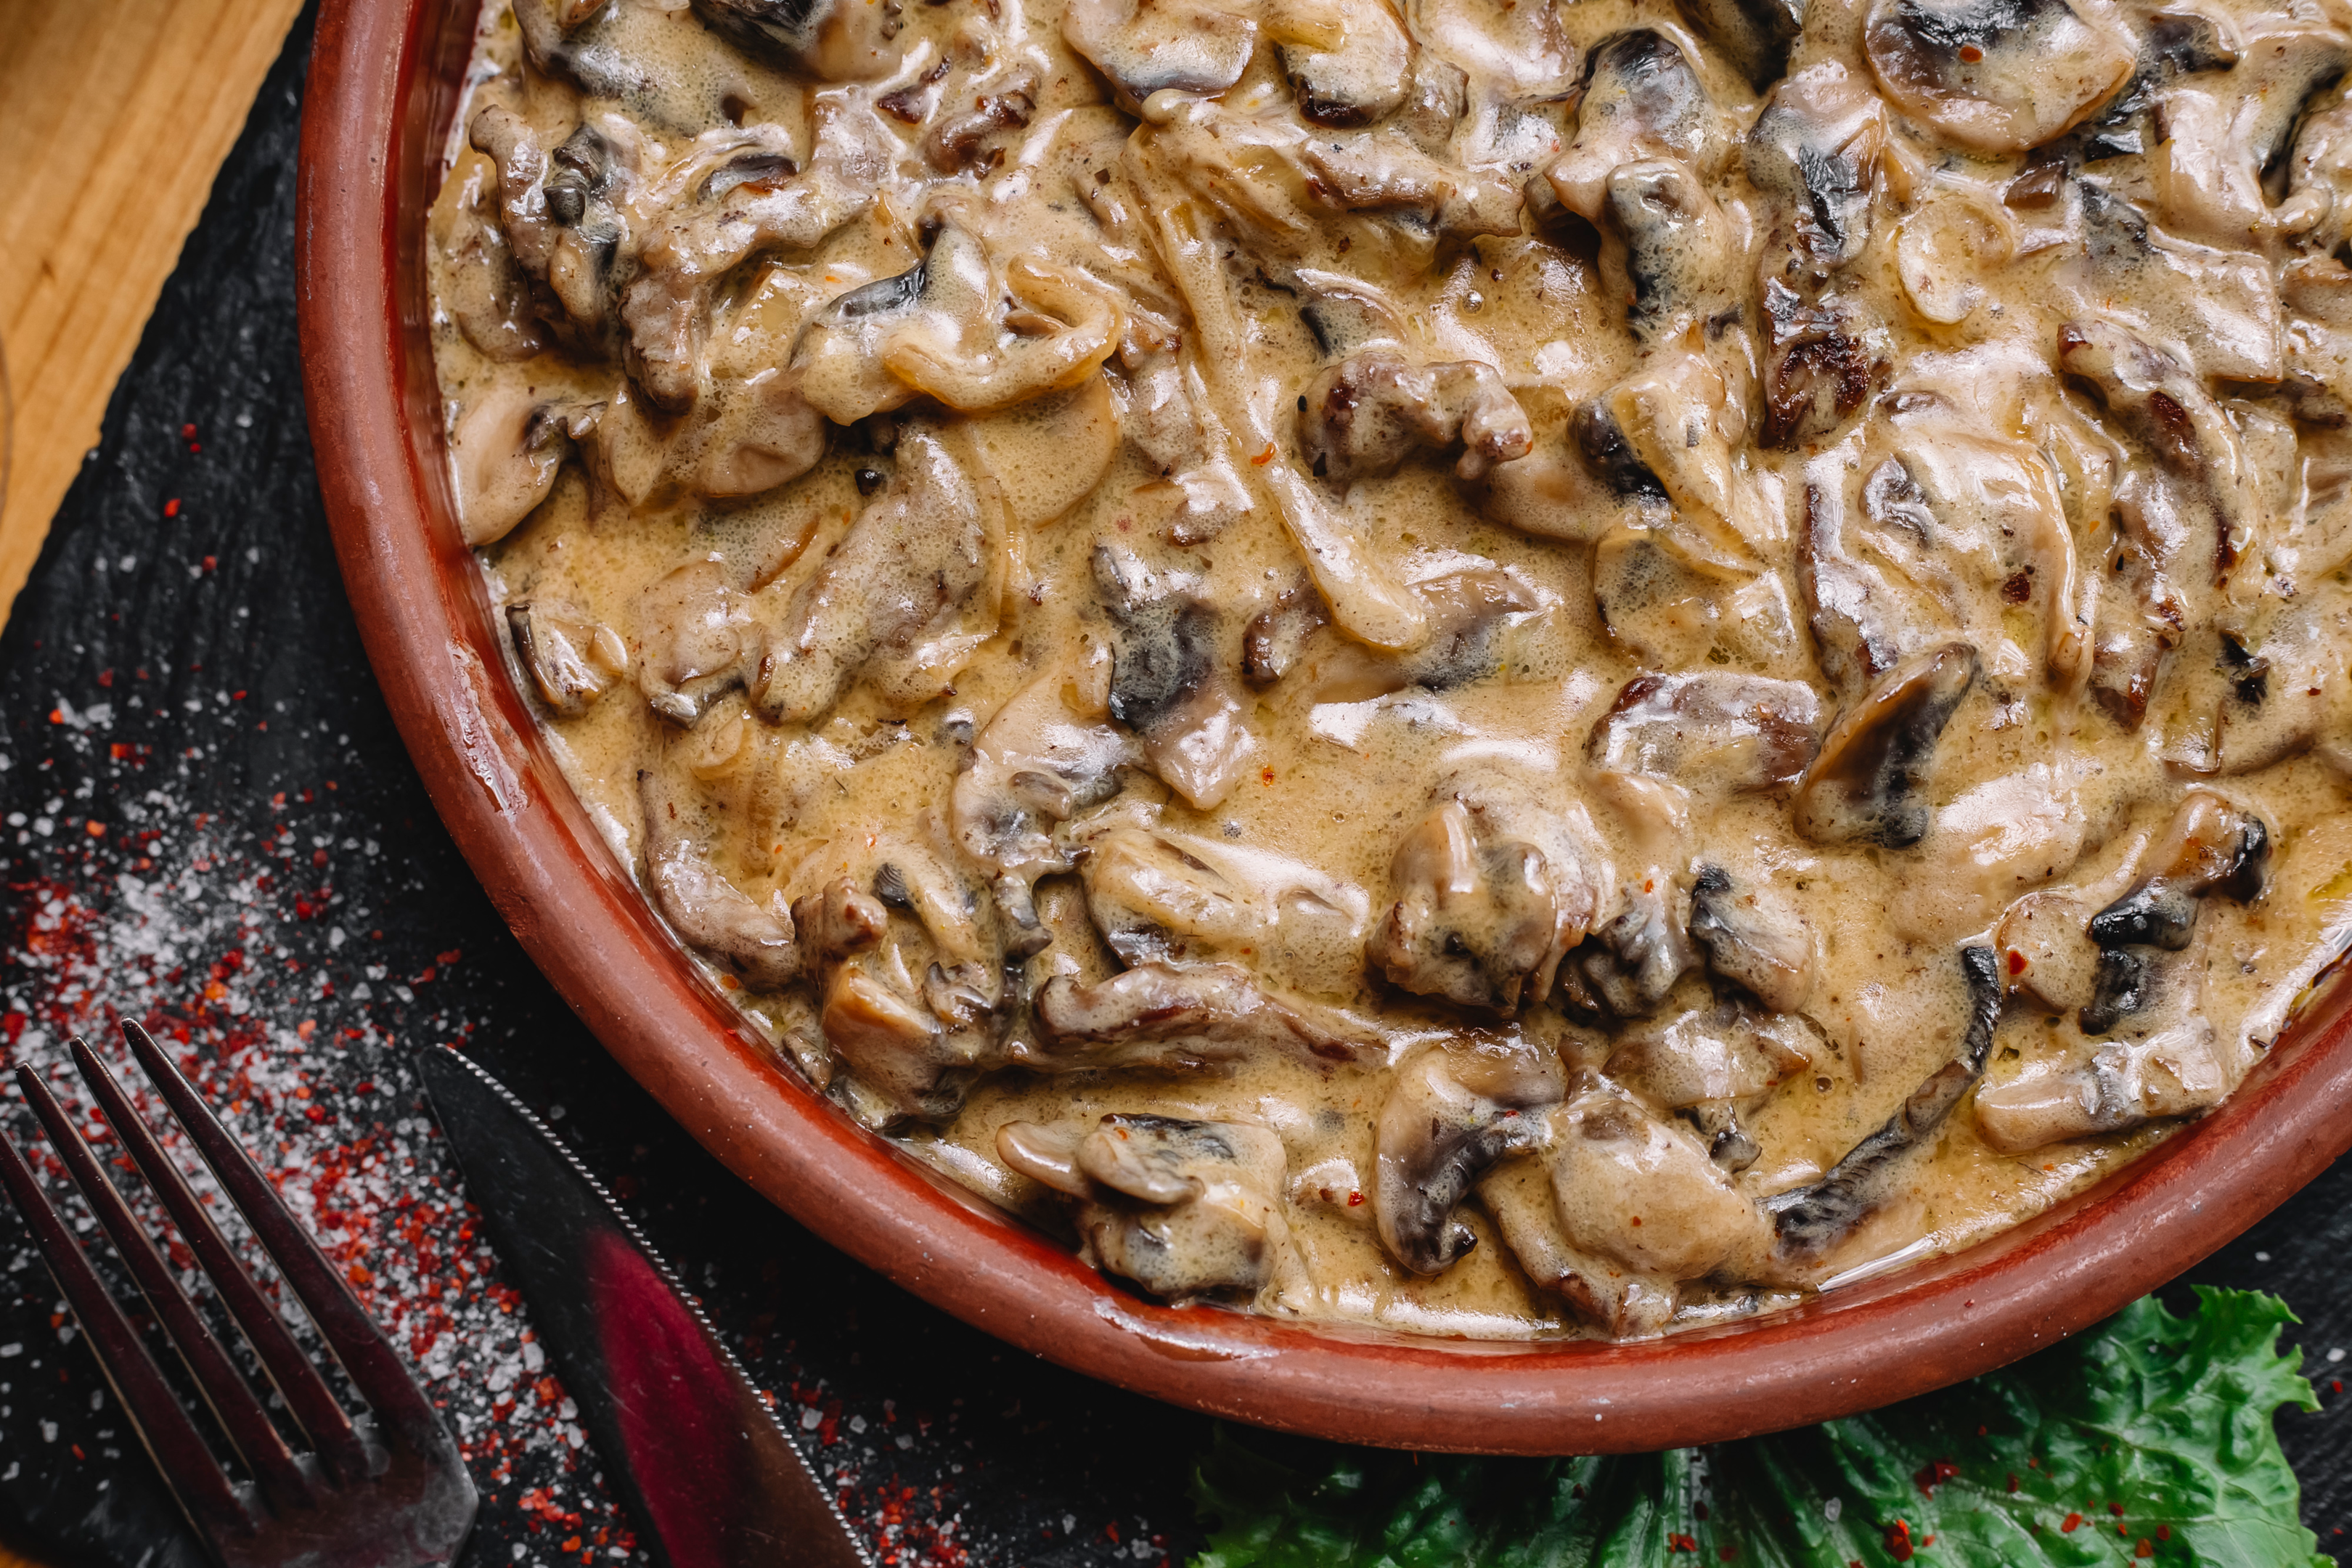 Use a mix of mushrooms for a vegetarian beef stroganoff, serve over rice, noodles or mashed potatoes.